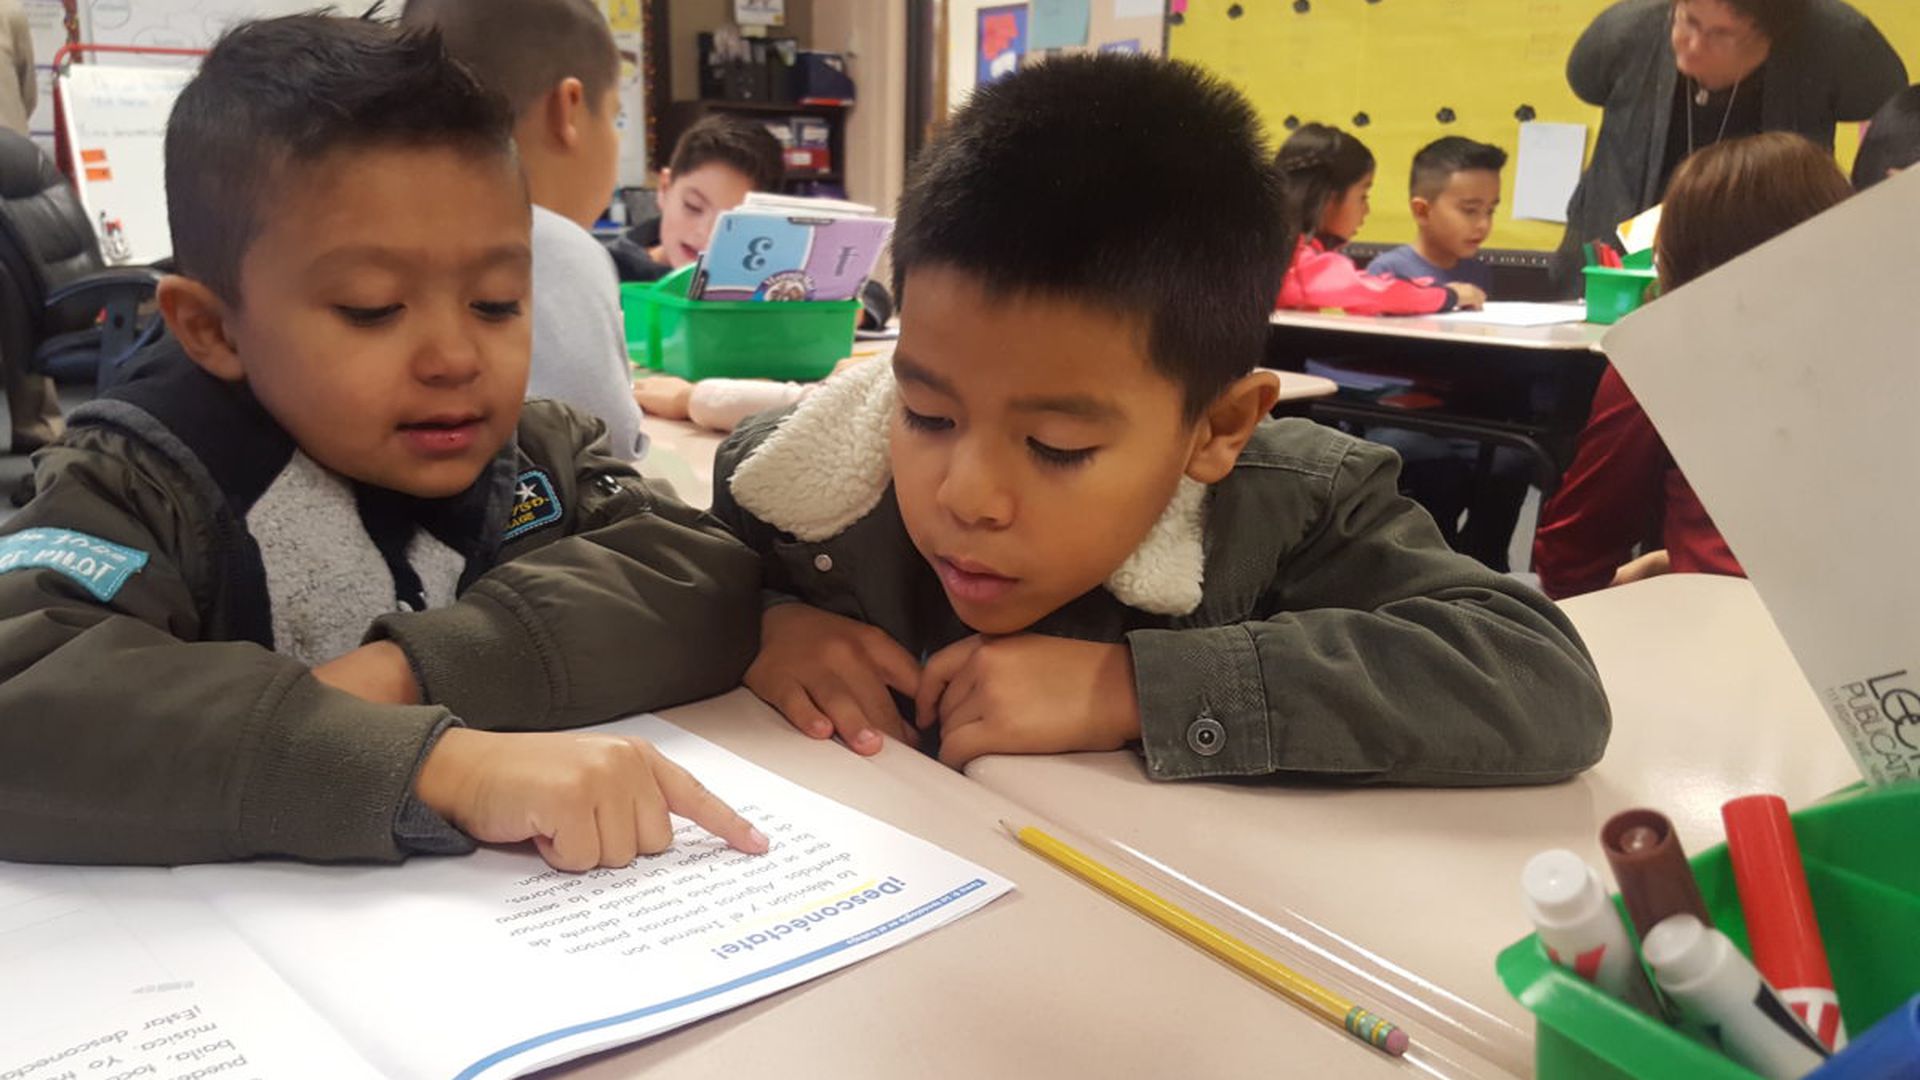 Two first grade boys look at a reading workbook at a desk in a classroom.